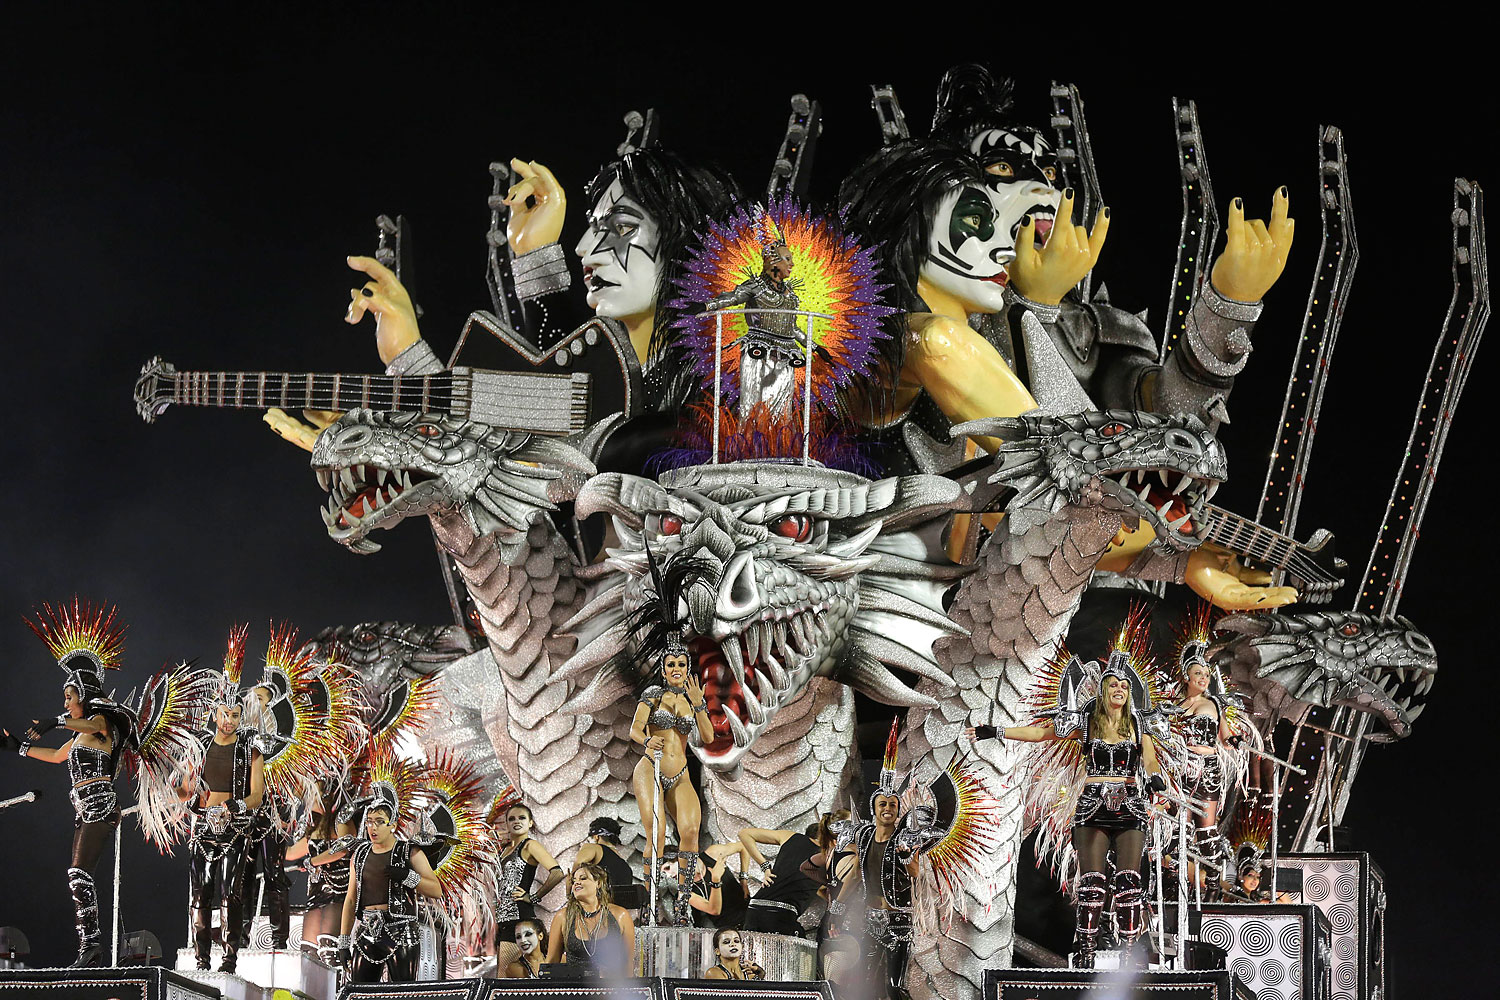 Dancers from the Dragoes da Real samba school perform on a float during a carnival parade in Sao Paulo, March 1, 2014.